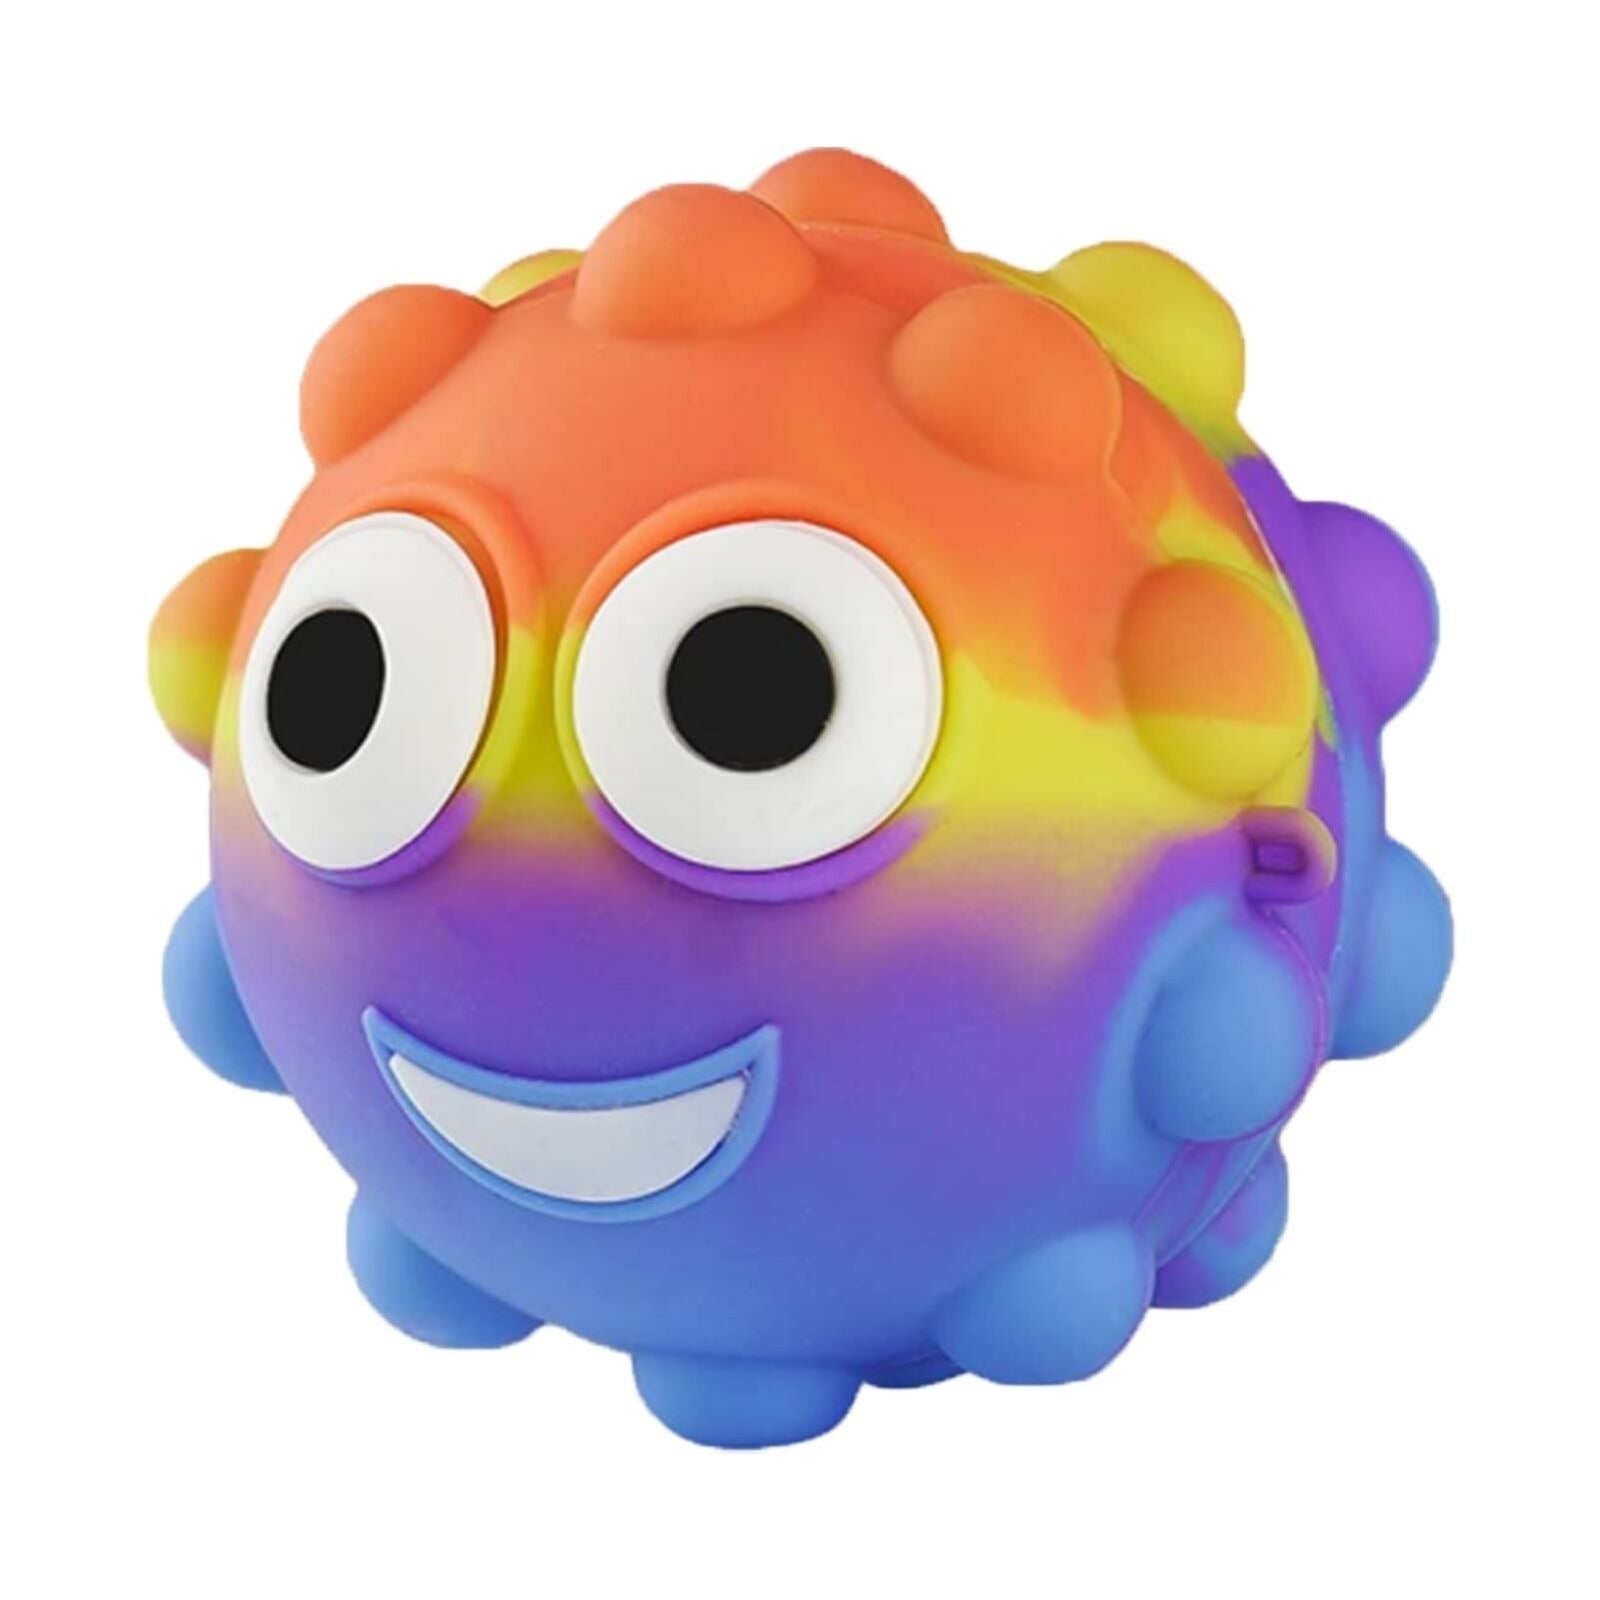 Pop N Squeeze Character Fidget Ball, Have hours of super sensory fun with this Pop ‘N’ Squeeze Character Fidget Ball! A cool and innovative way to help you stop fidgeting and try to de-stress whilst having fun.This rainbow circular-shaped toy is covered in small bumps for a satisfying sensory experience.This fiddle toy is immensely satisfying to use and can help to relieve both stress and anxiety. A must have for serial fidgeting!Product Information:• Pop ‘N’ Squeeze Character ball• Fidget Ball• Colour: Ass